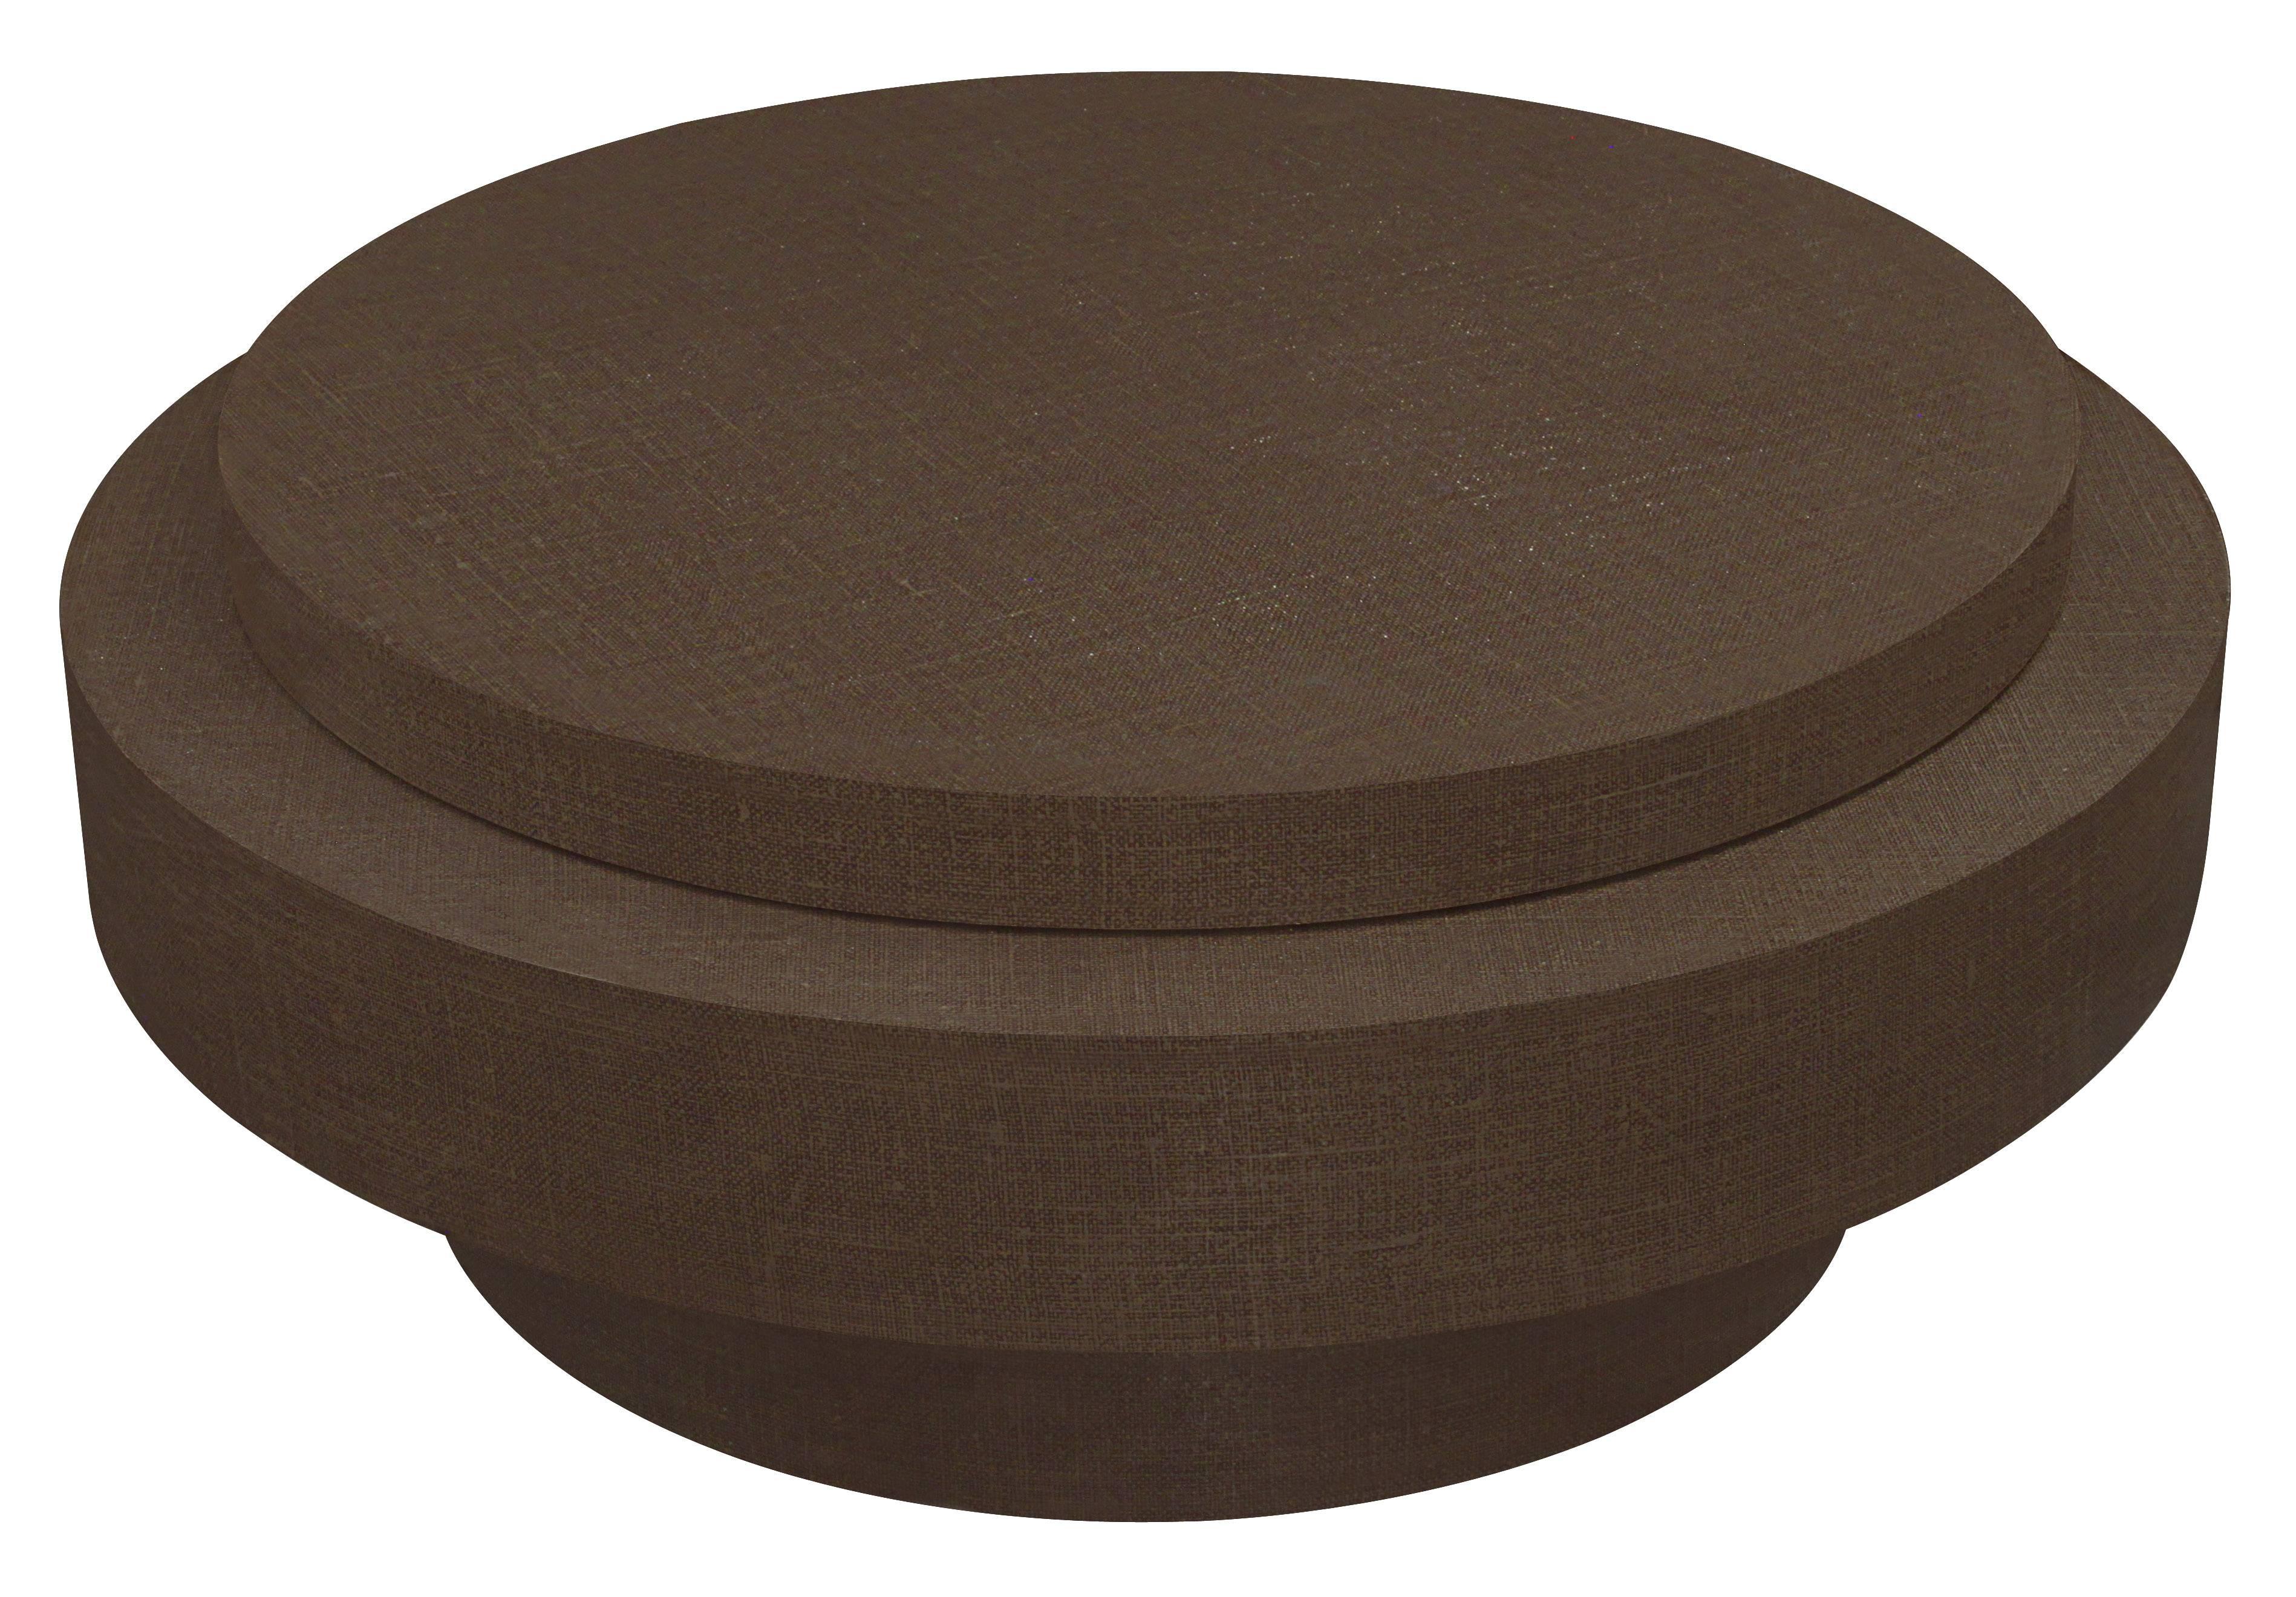 Chic coffee table in lacquered linen with top which rotates out away from the base in the manner of Gabriella Crespi, American, 1970s.
Measures: 40 inches in diameter when top is centered.